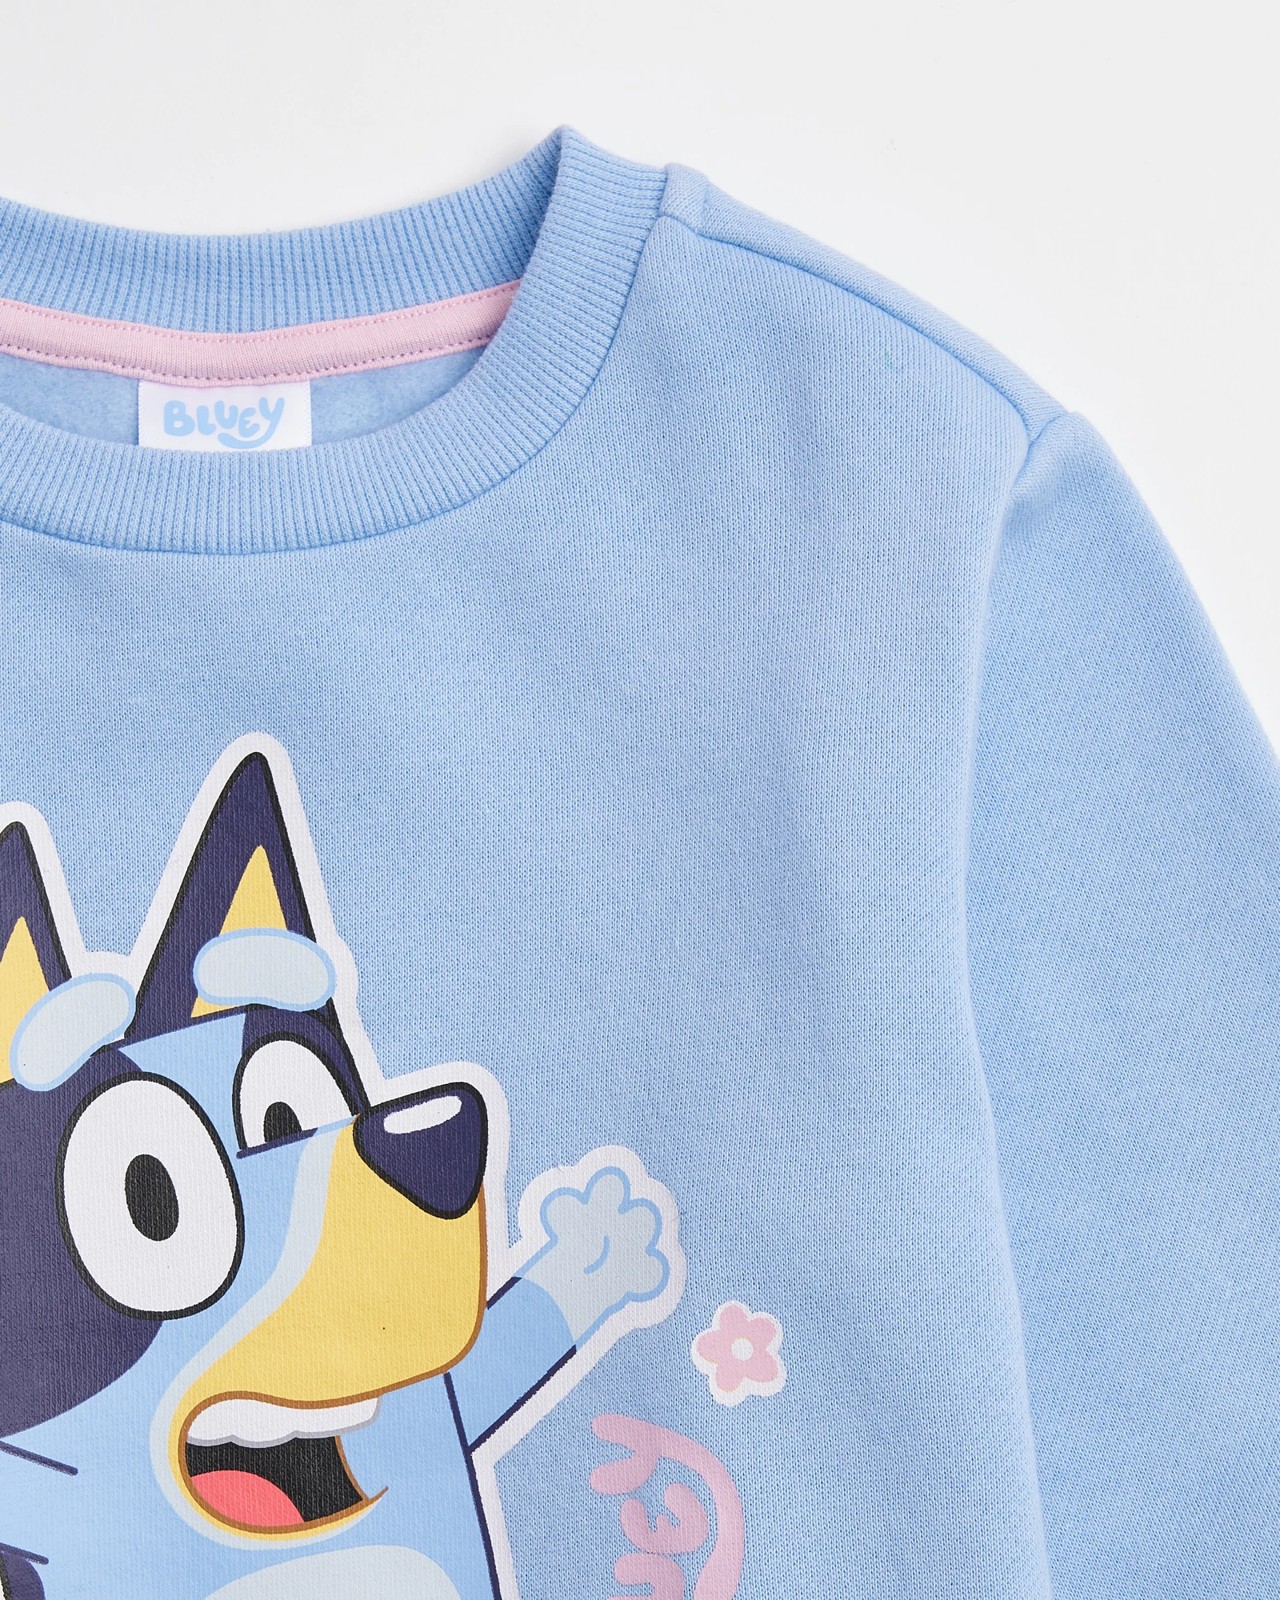 Welcome back to school Bluey shirt, hoodie, sweater and v-neck t-shirt